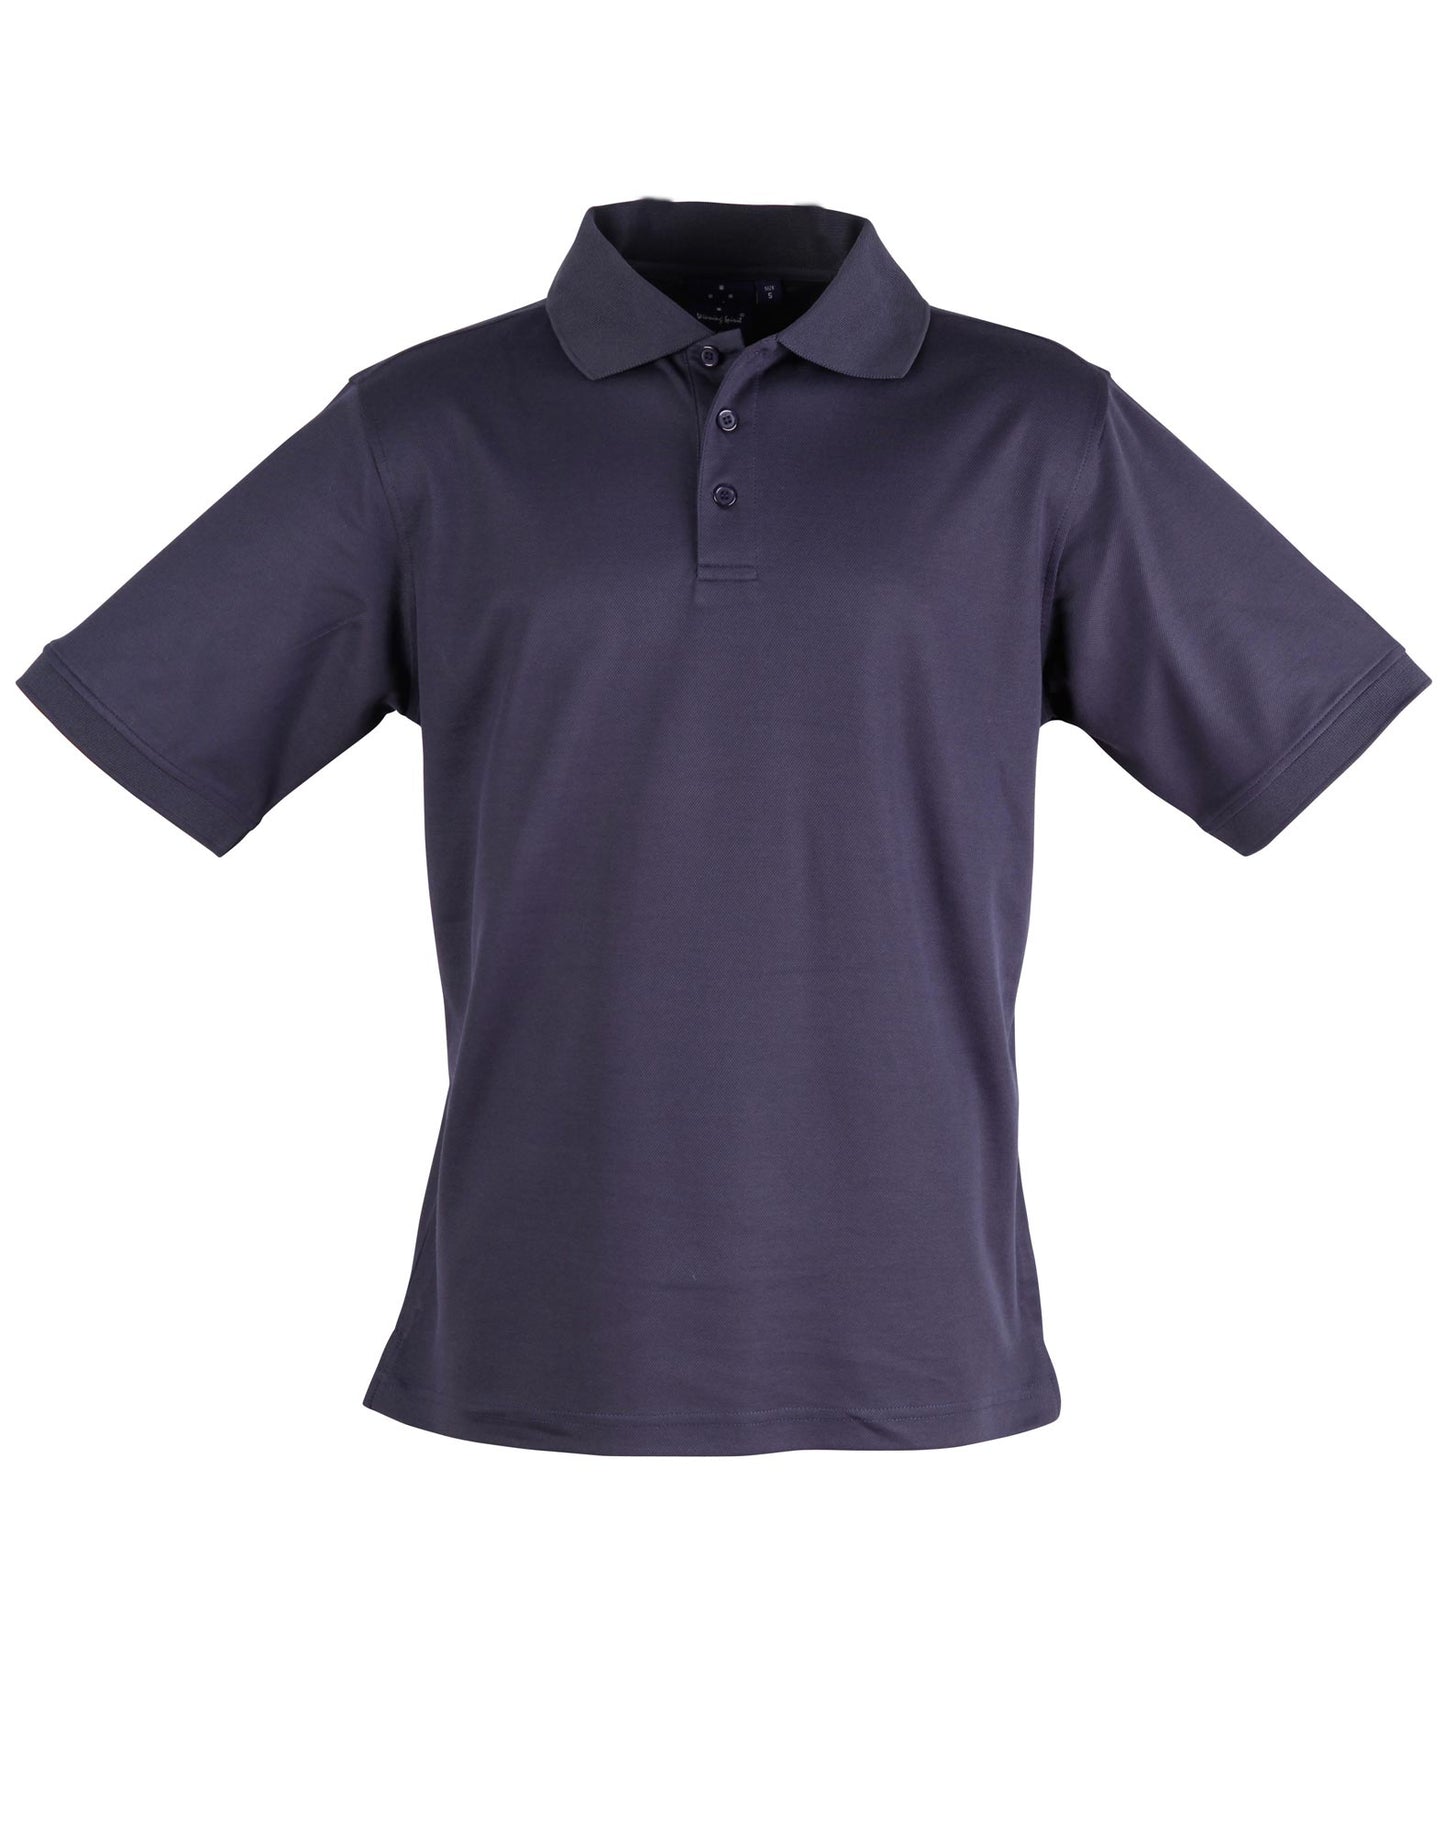 Victory Truedry Polo Shirt - made by AIW